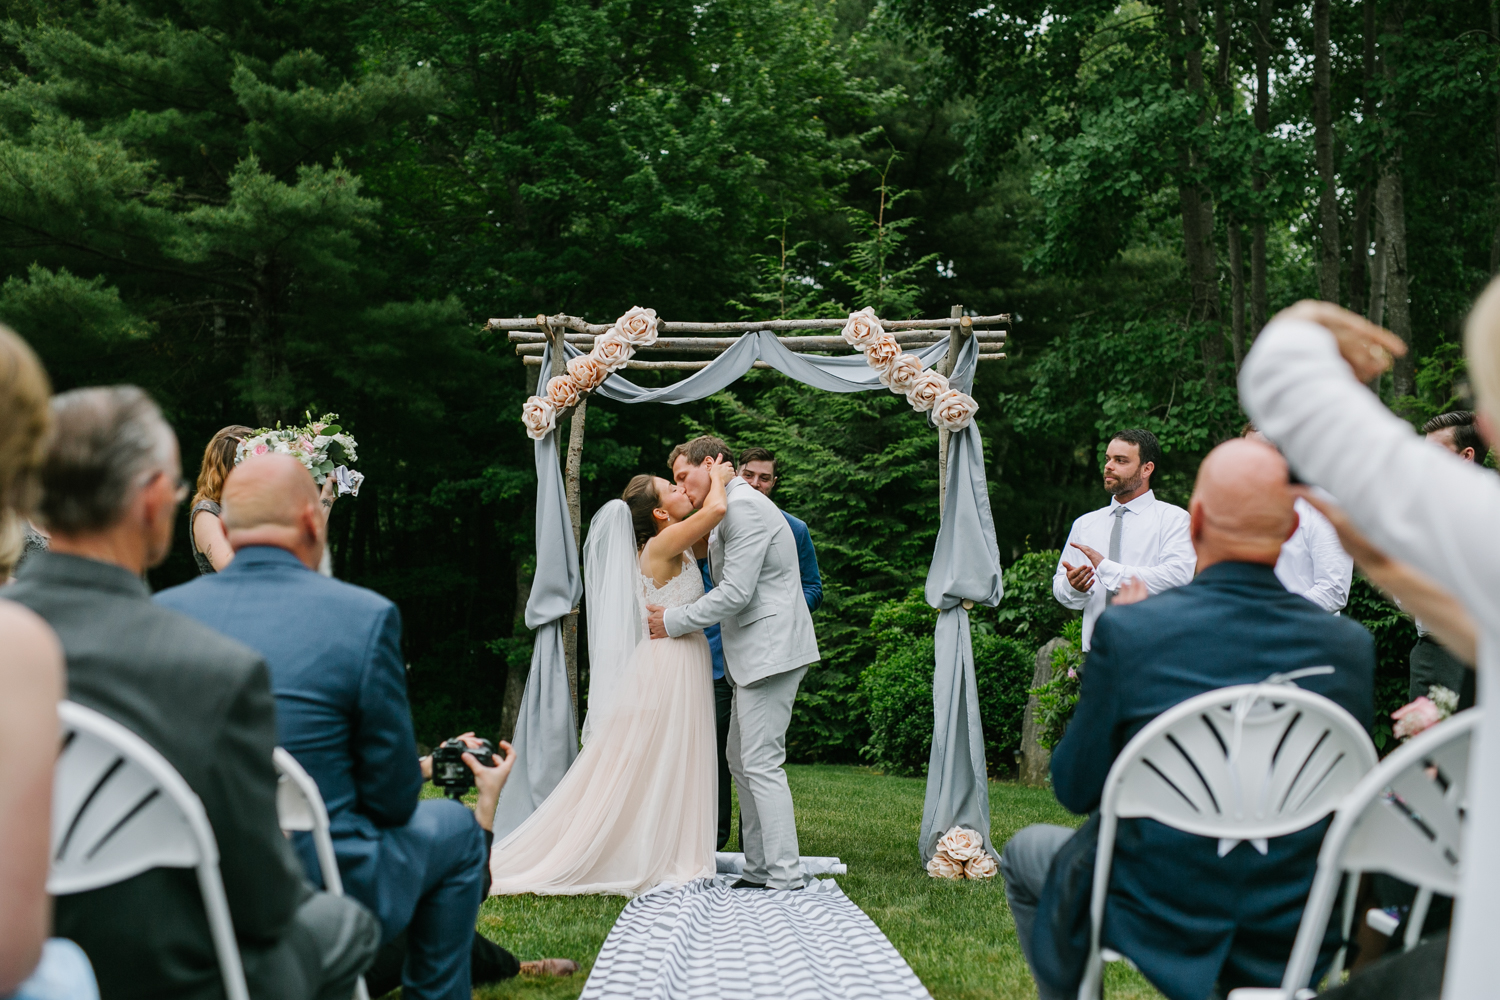 Emily Tebbetts Photography - back yard wedding gif atkinson nh confetti recessional bride and groom pizza truck -9.jpg